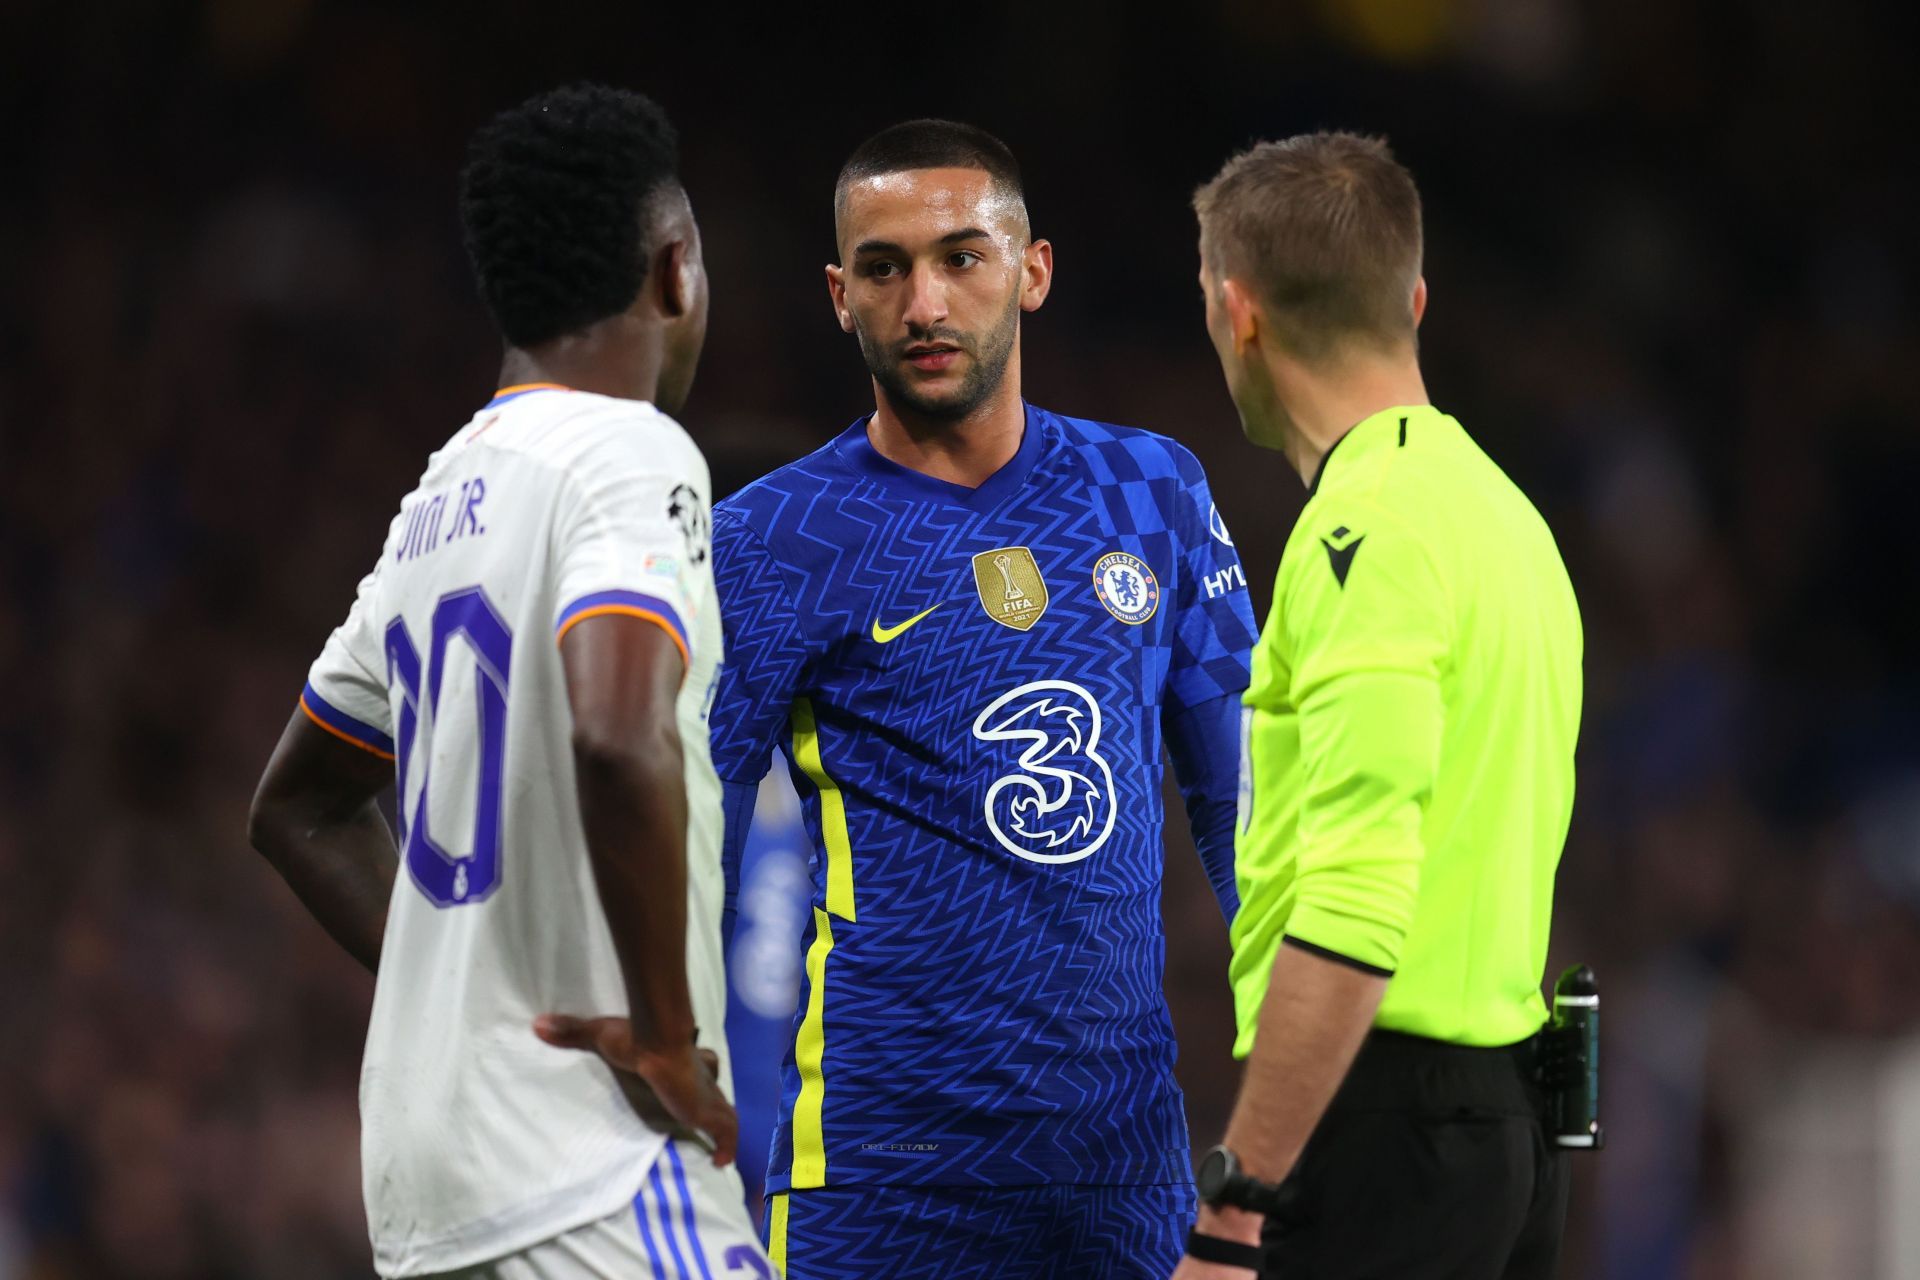 Hakim Ziyech is likely to leave Stamford Bridge this summer.